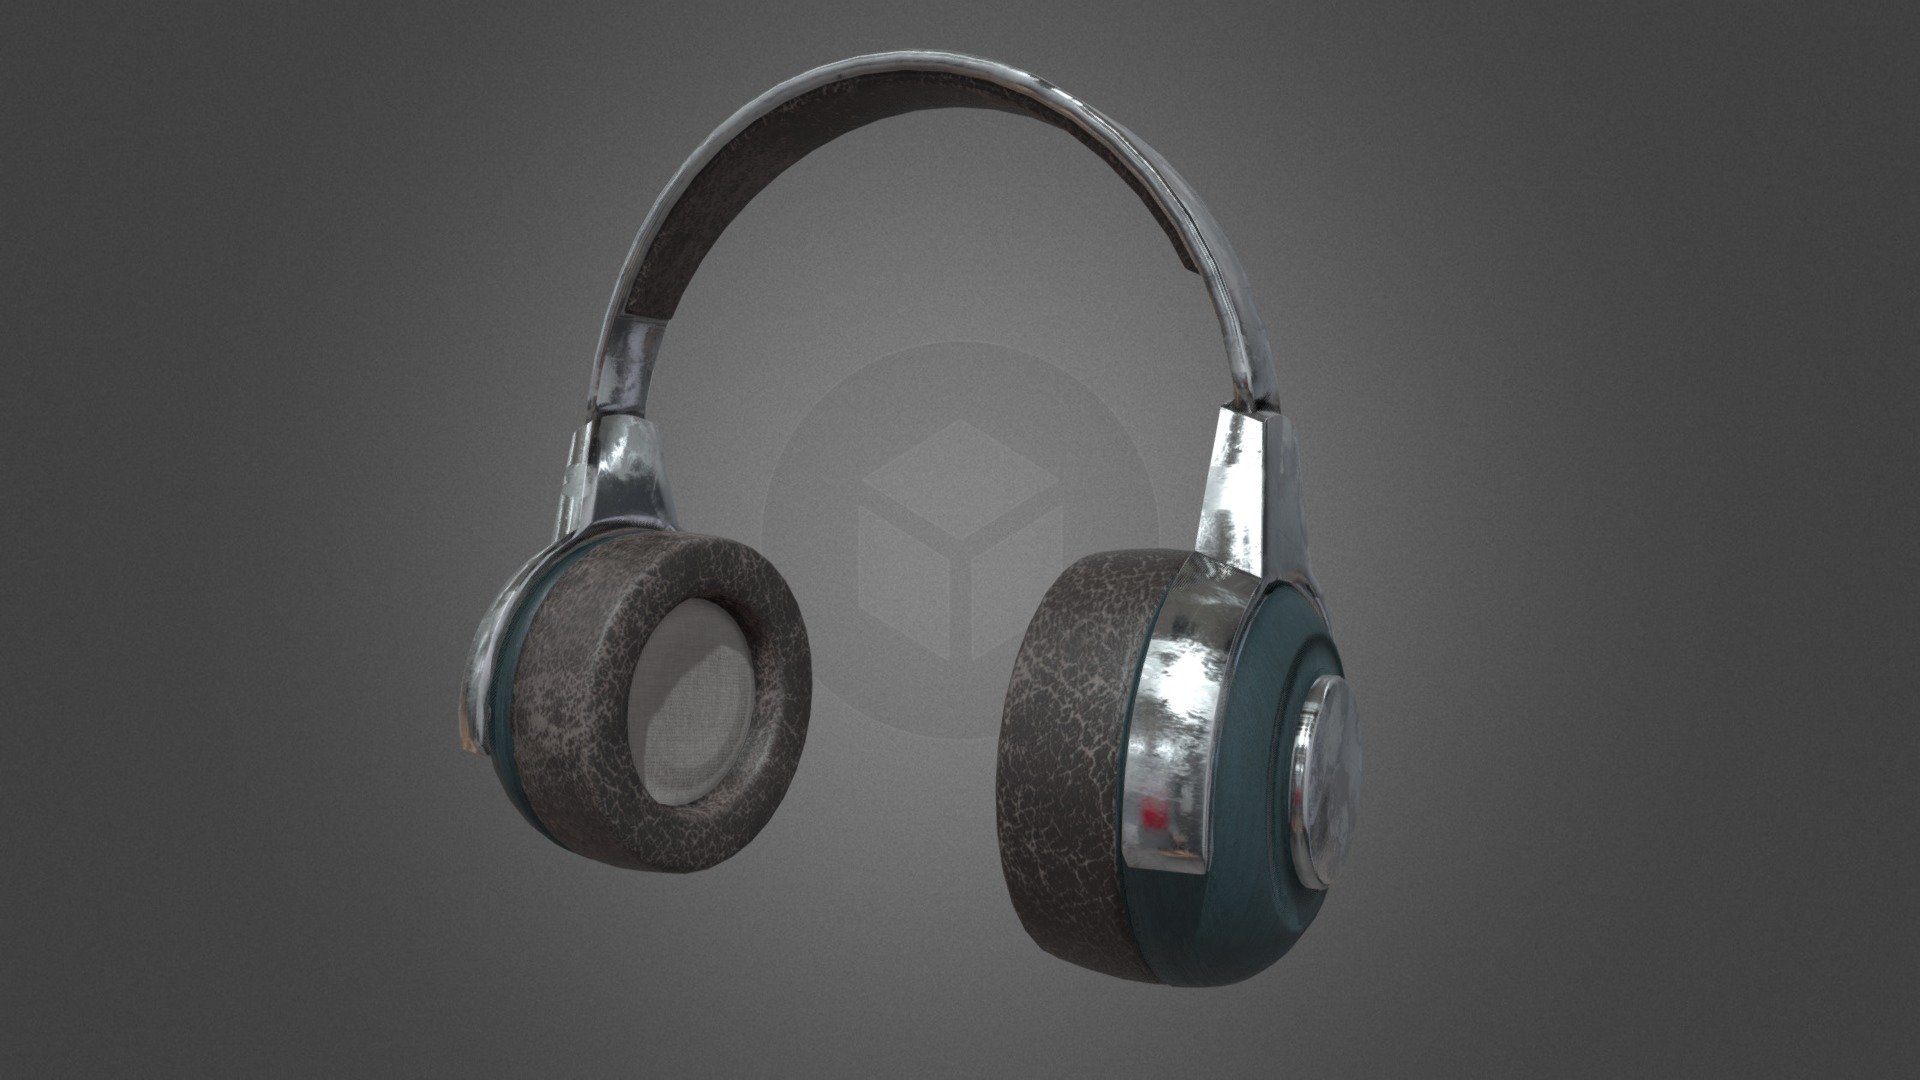 Wireless Designer Headphones with leather and wood and steel materials. With surface imperfections.

Textures are 4K 4096x4096 (Color, Roughness, Normal/Bump) - Wireless Designer Headphones - Buy Royalty Free 3D model by Samuel Francis Johnson (Oneironauticus) (@oneironauticus) 3d model